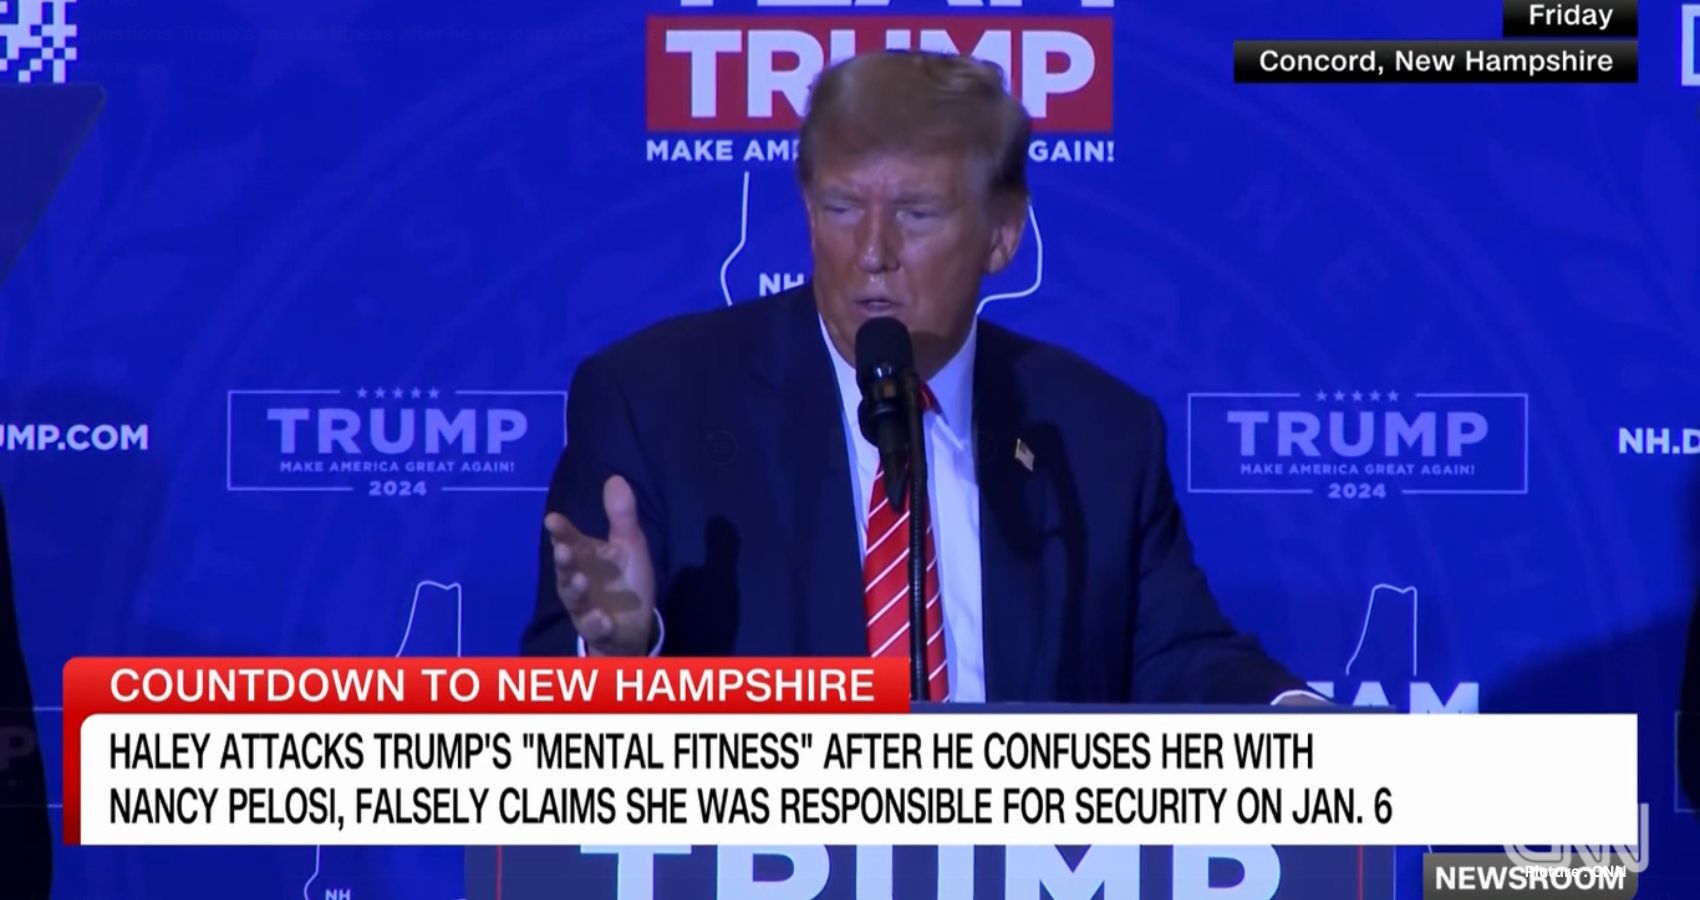 Nikki Haley Questions Trump’s Mental Fitness Amidst Confusion Over Capitol Riot Remarks, Campaign Rhetoric Heats Up in New Hampshire